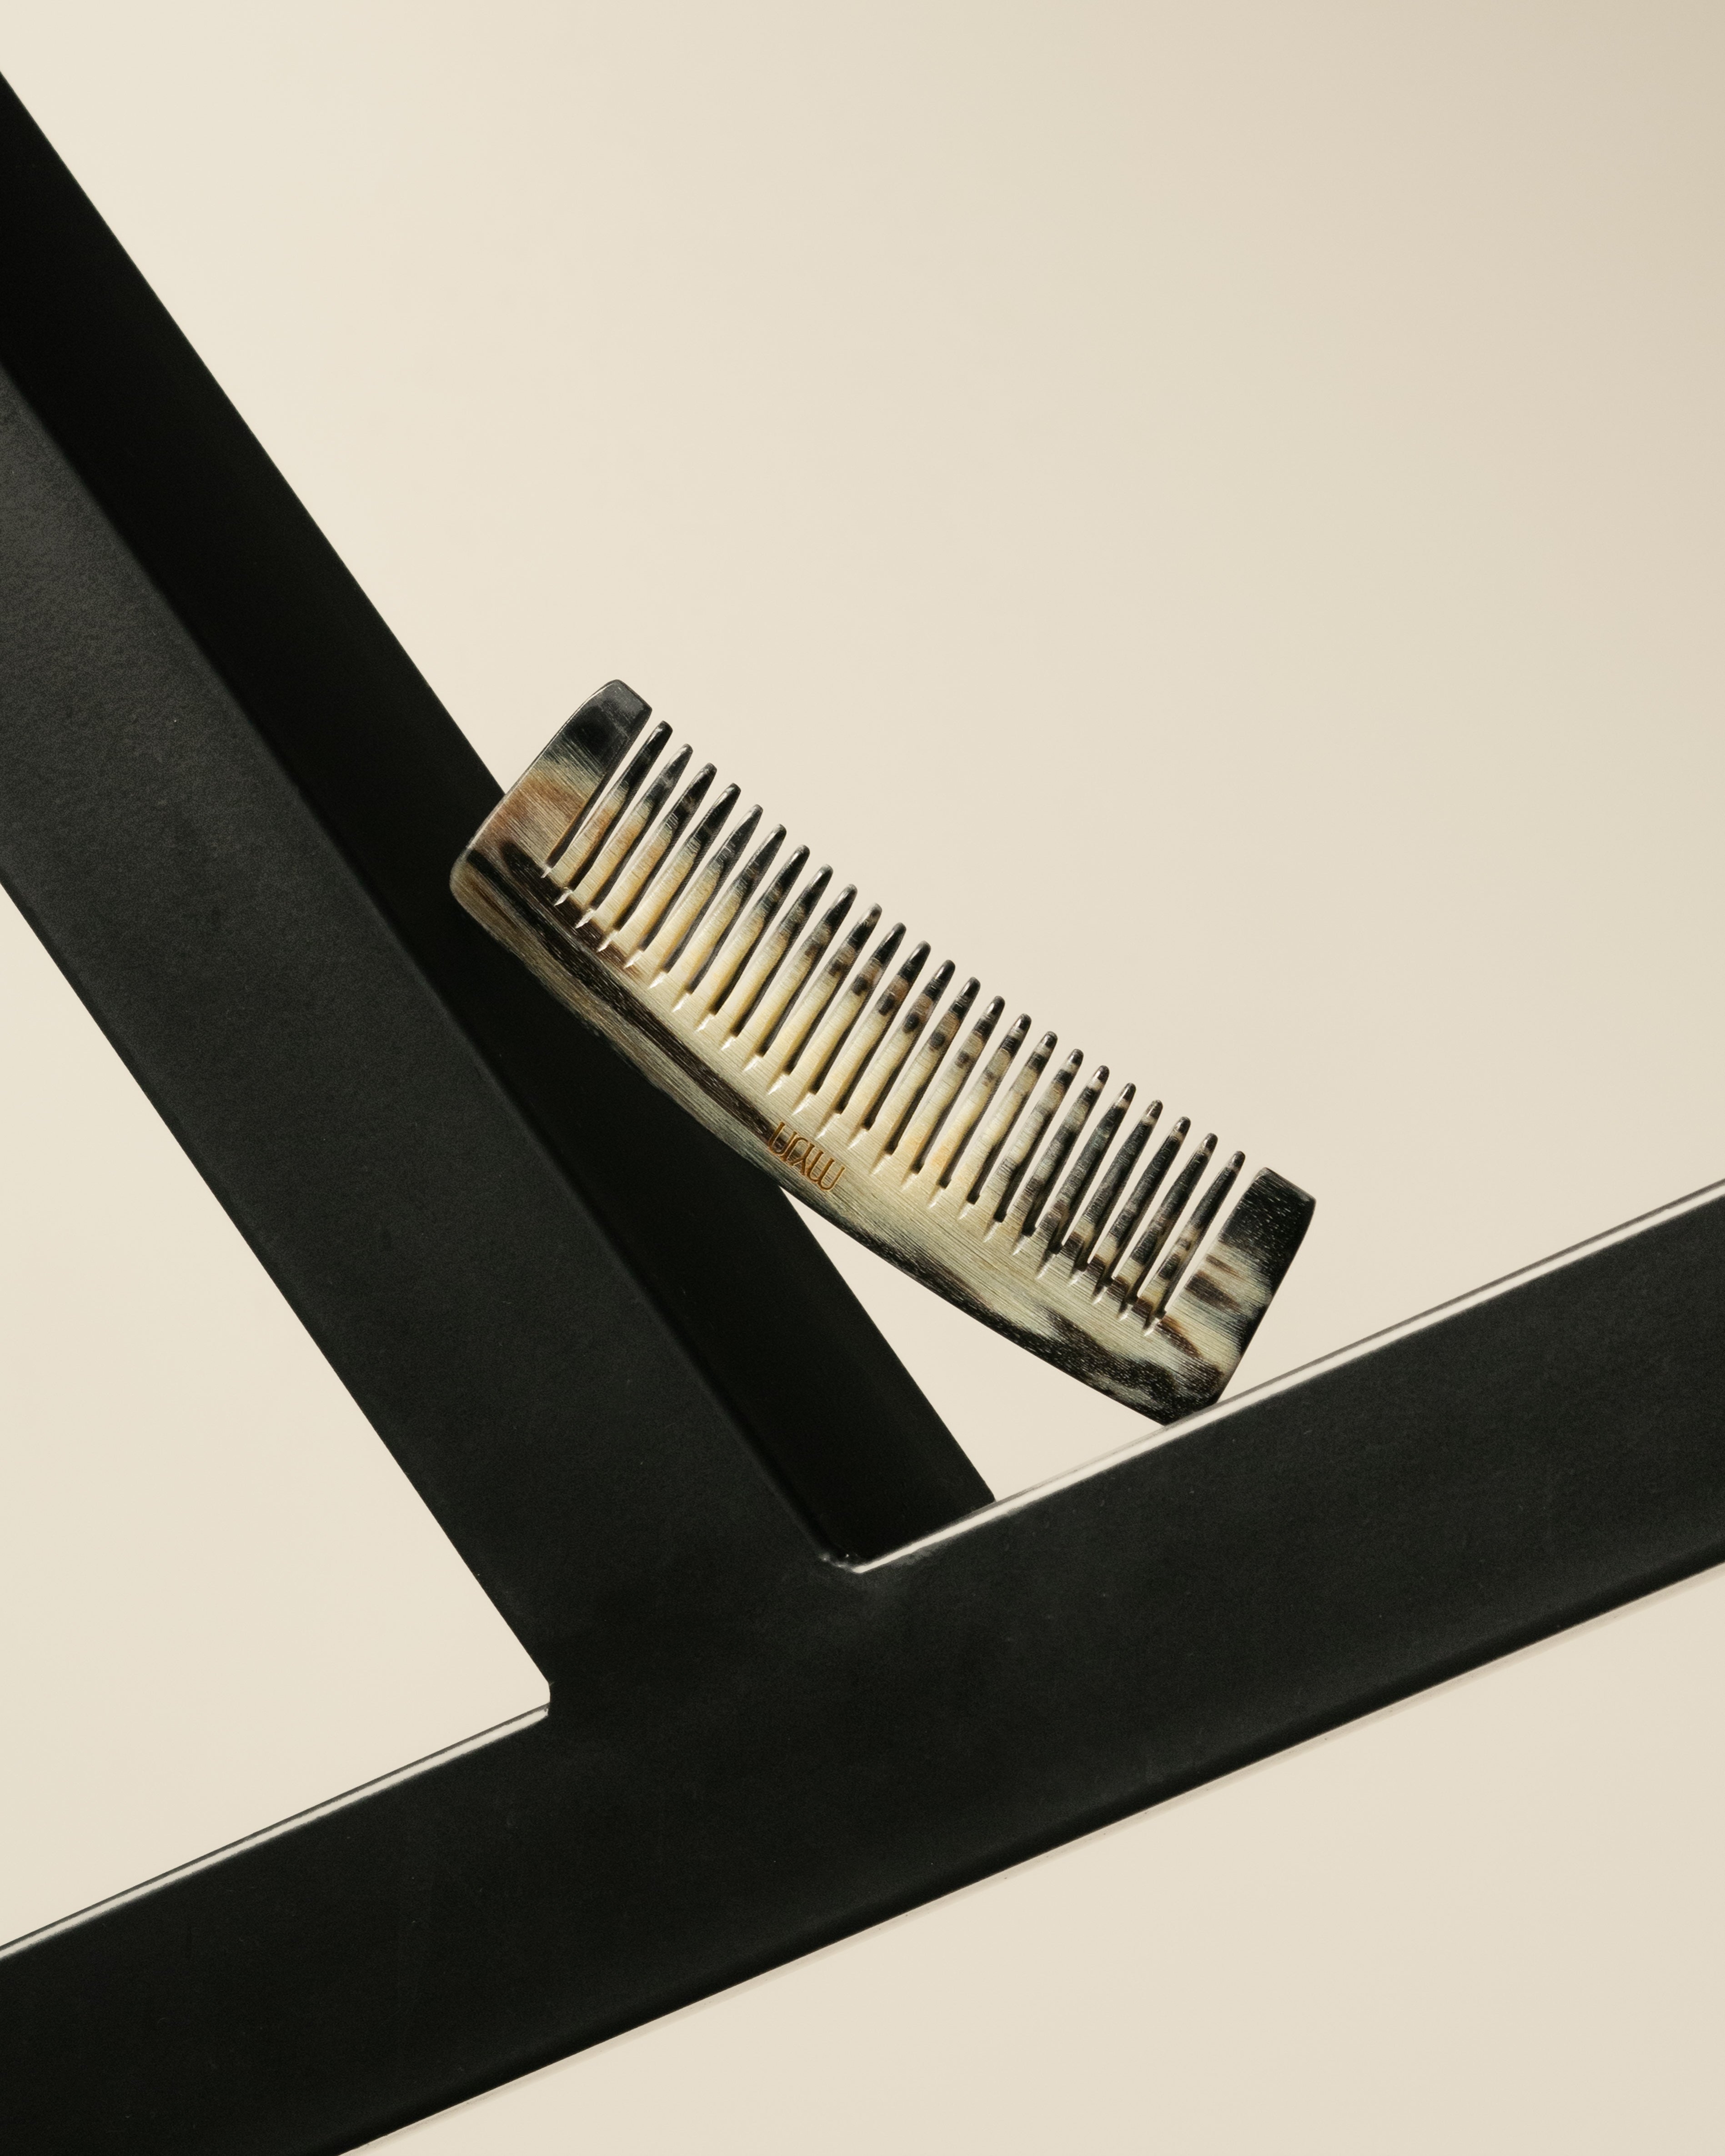 The Horn Comb 001